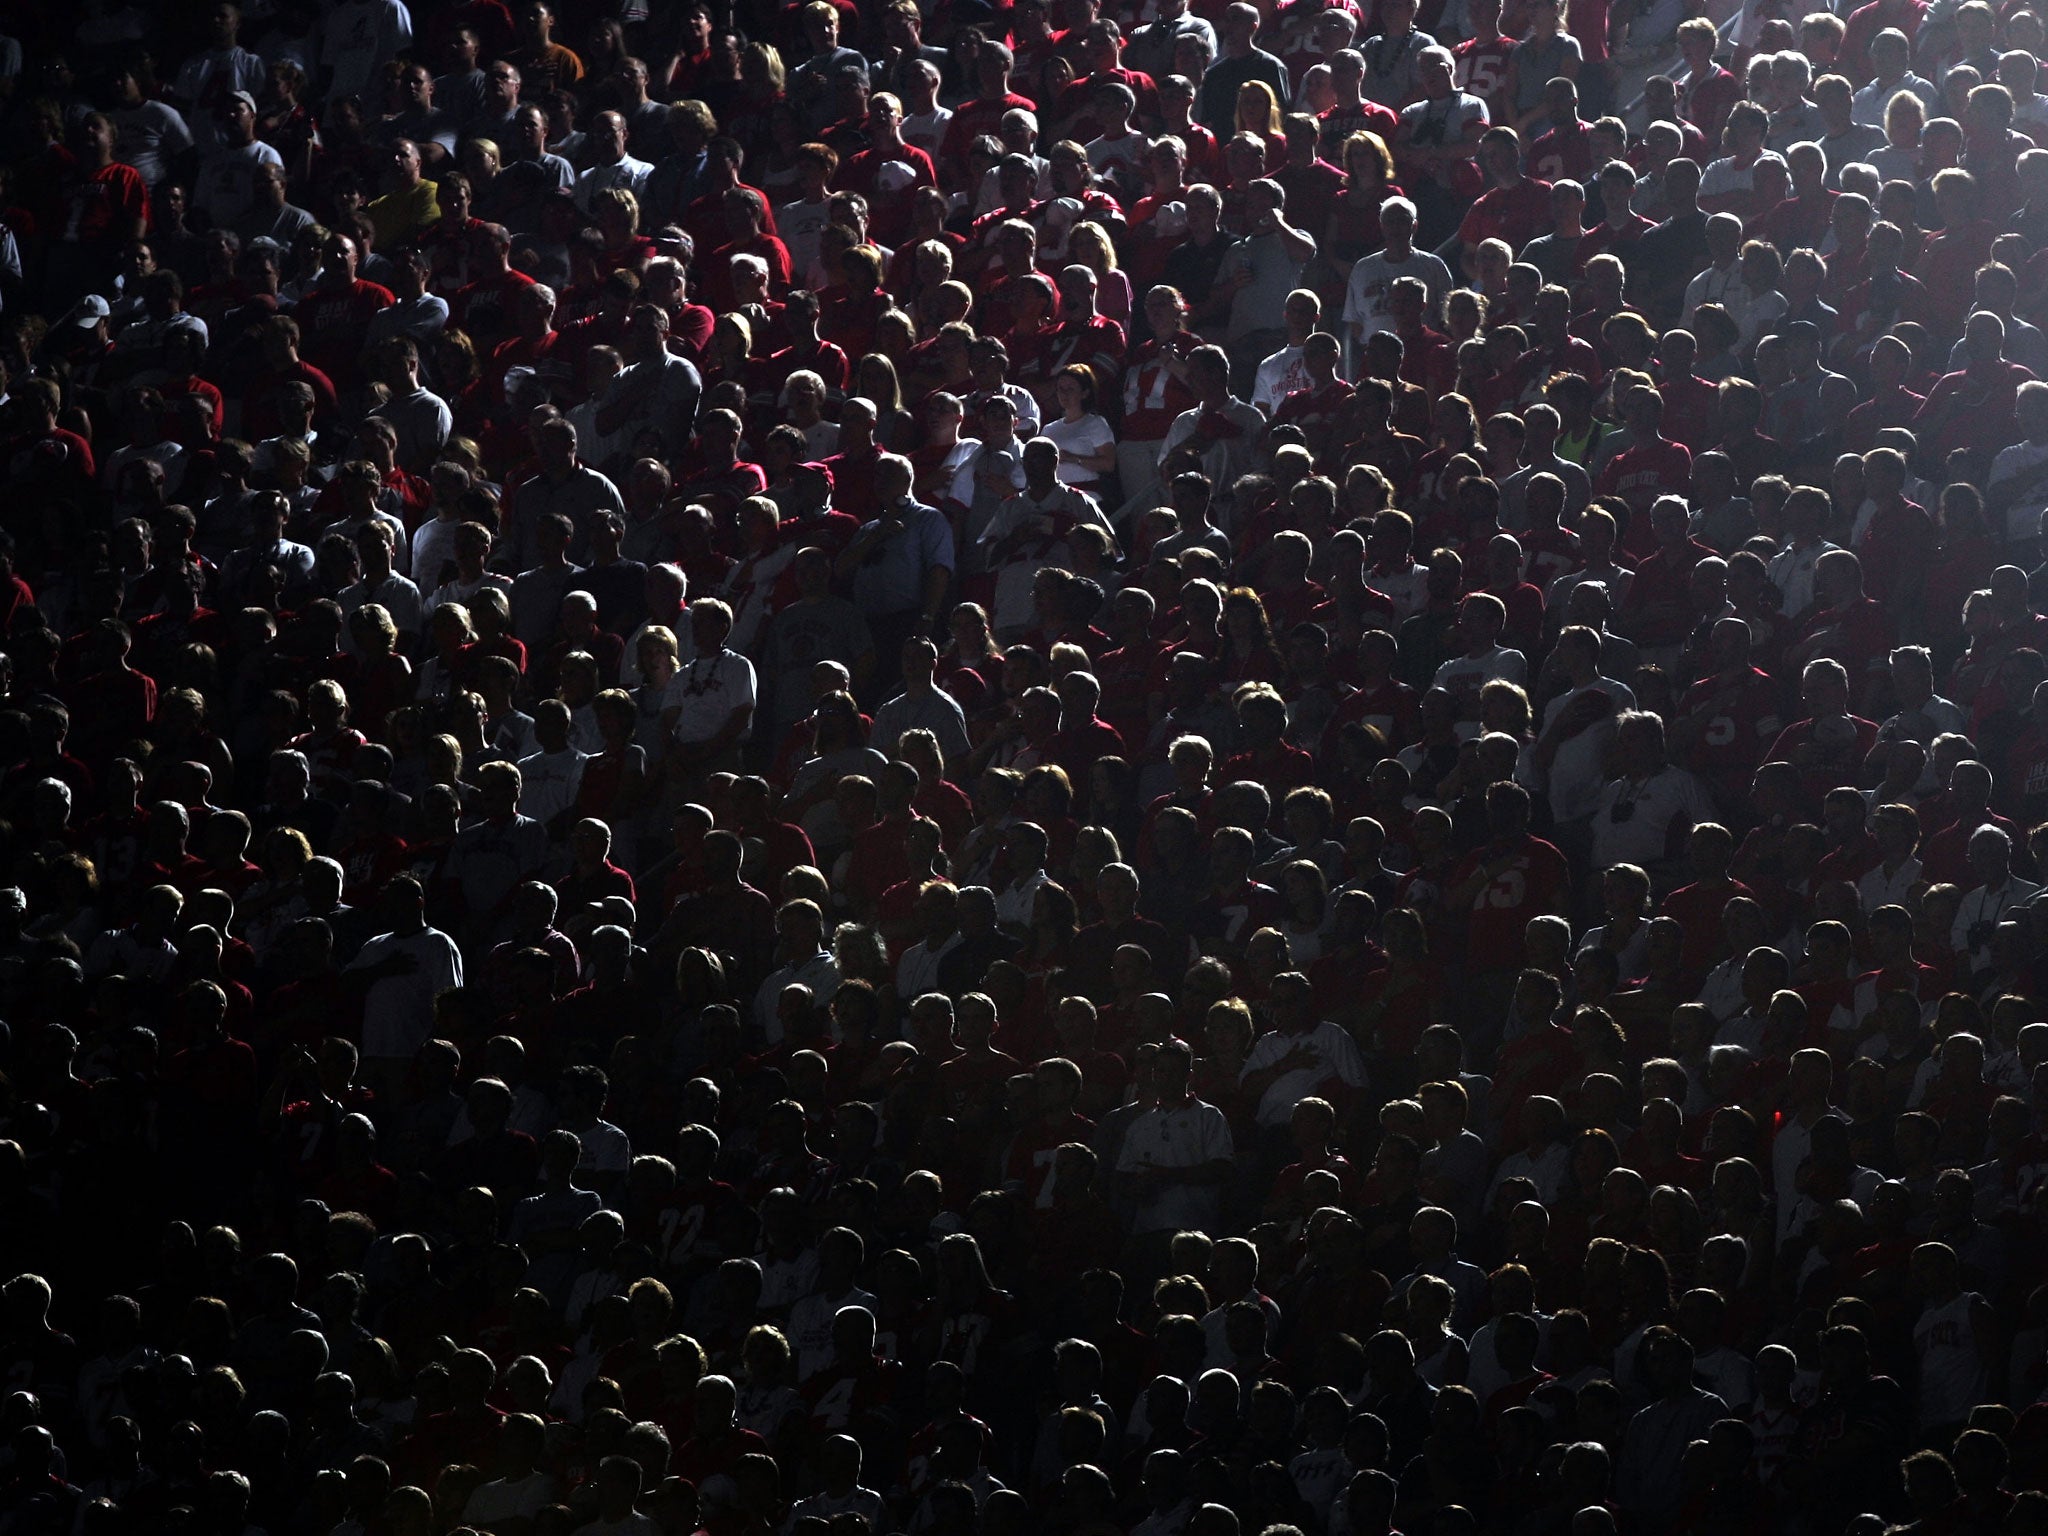 There are just too many of us: A crowd of sports fans seen under the stadium lights